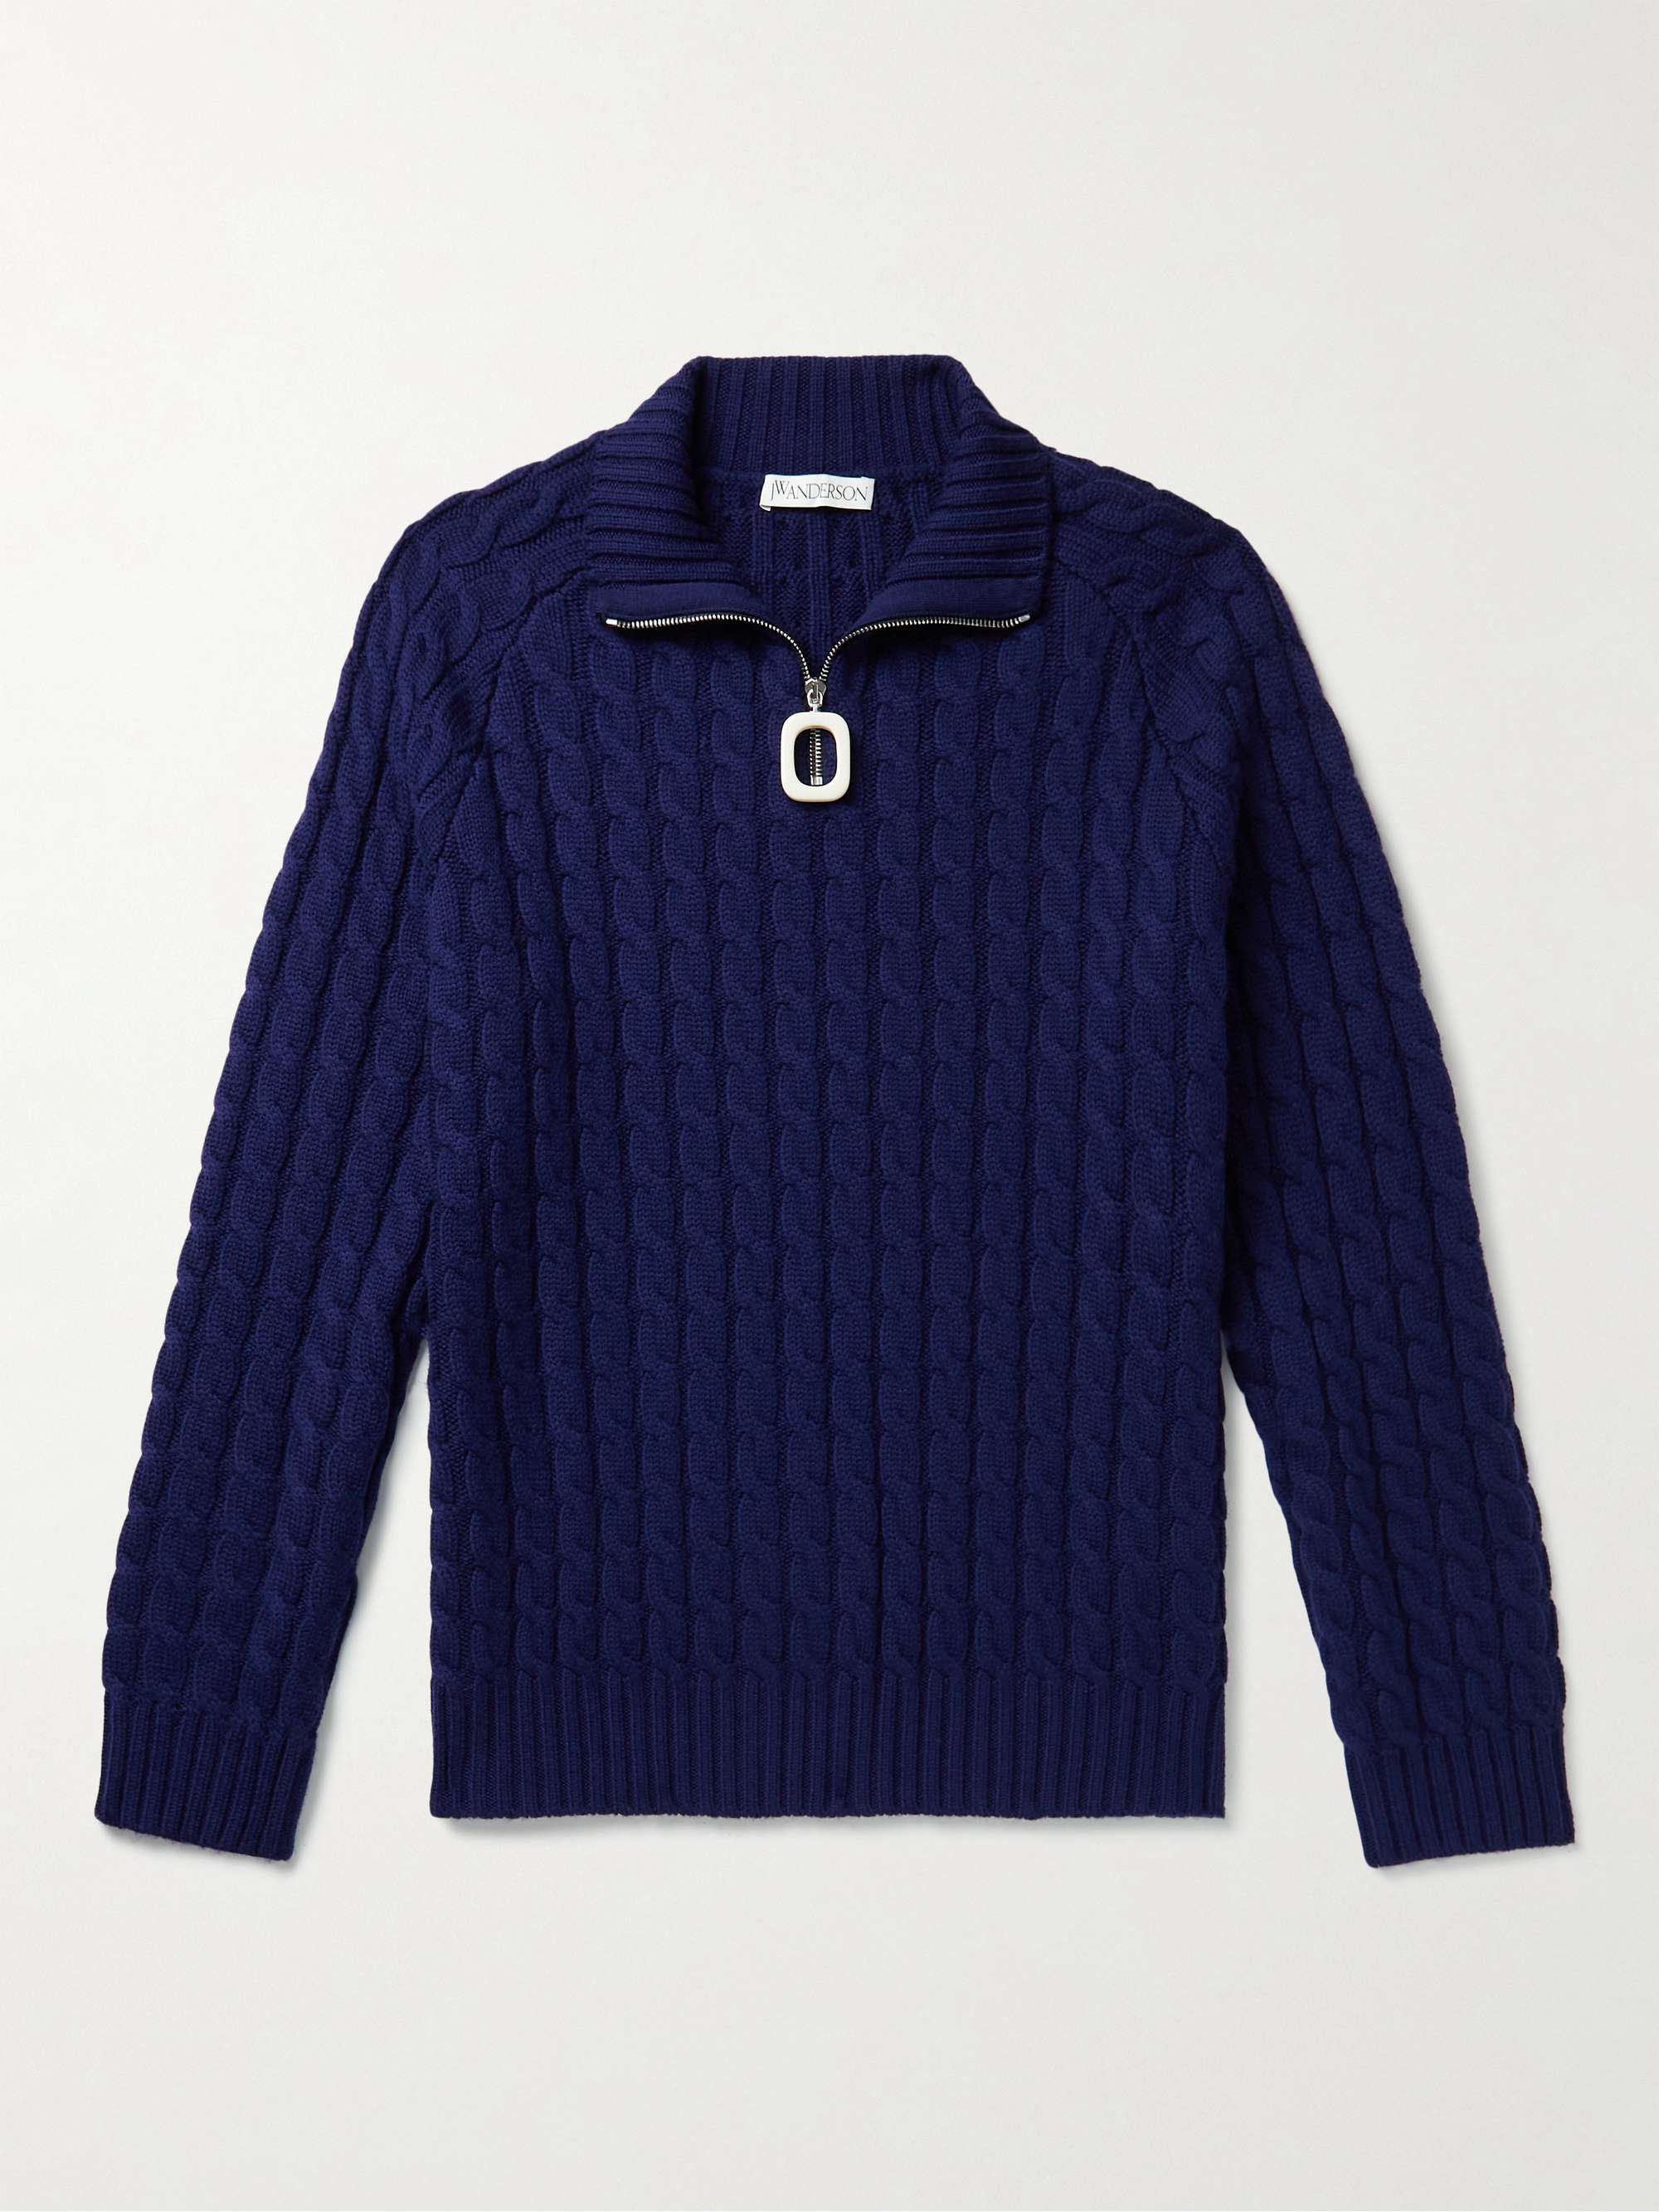 JW Anderson Wool Cable Knit Jumper in Black Mens Clothing Sweaters and knitwear Turtlenecks for Men Blue 